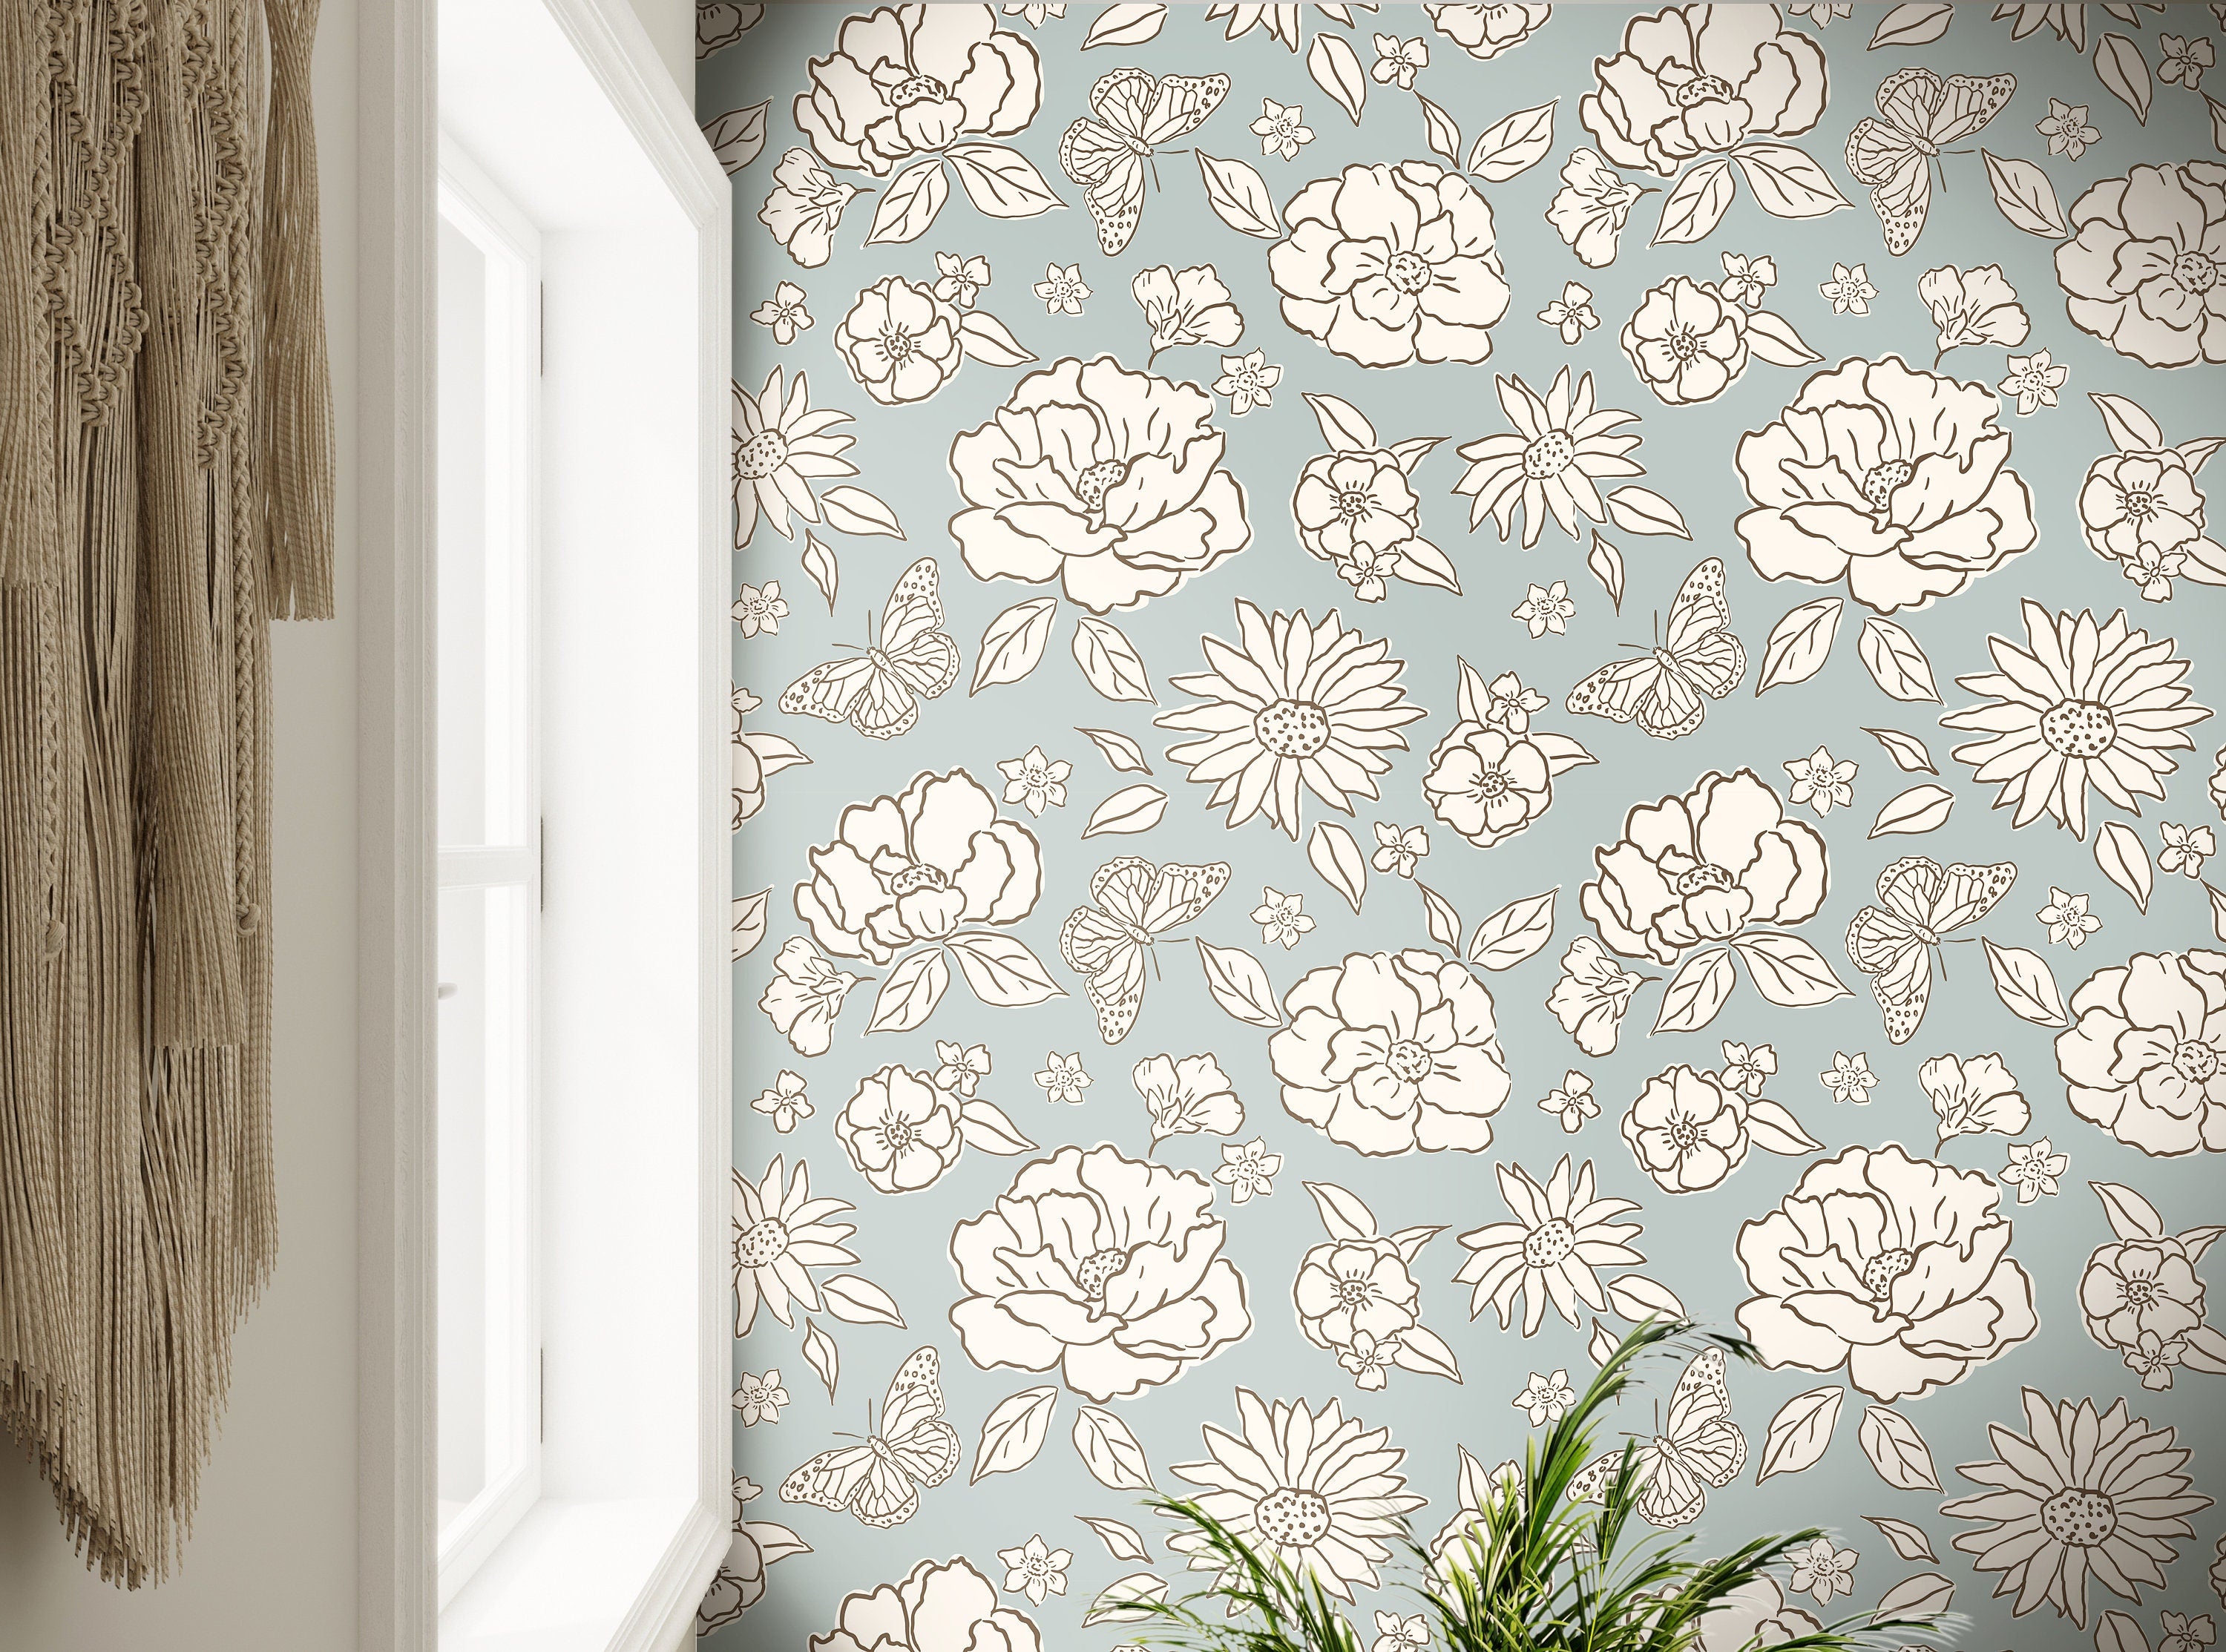 Wallpaper Peel and Stick Wallpaper Muted Blue and Cream Floral Outline Removable Wallpaper Wall Decor Home Decor Wall Art Room Decor 3746 - JamesAndColors